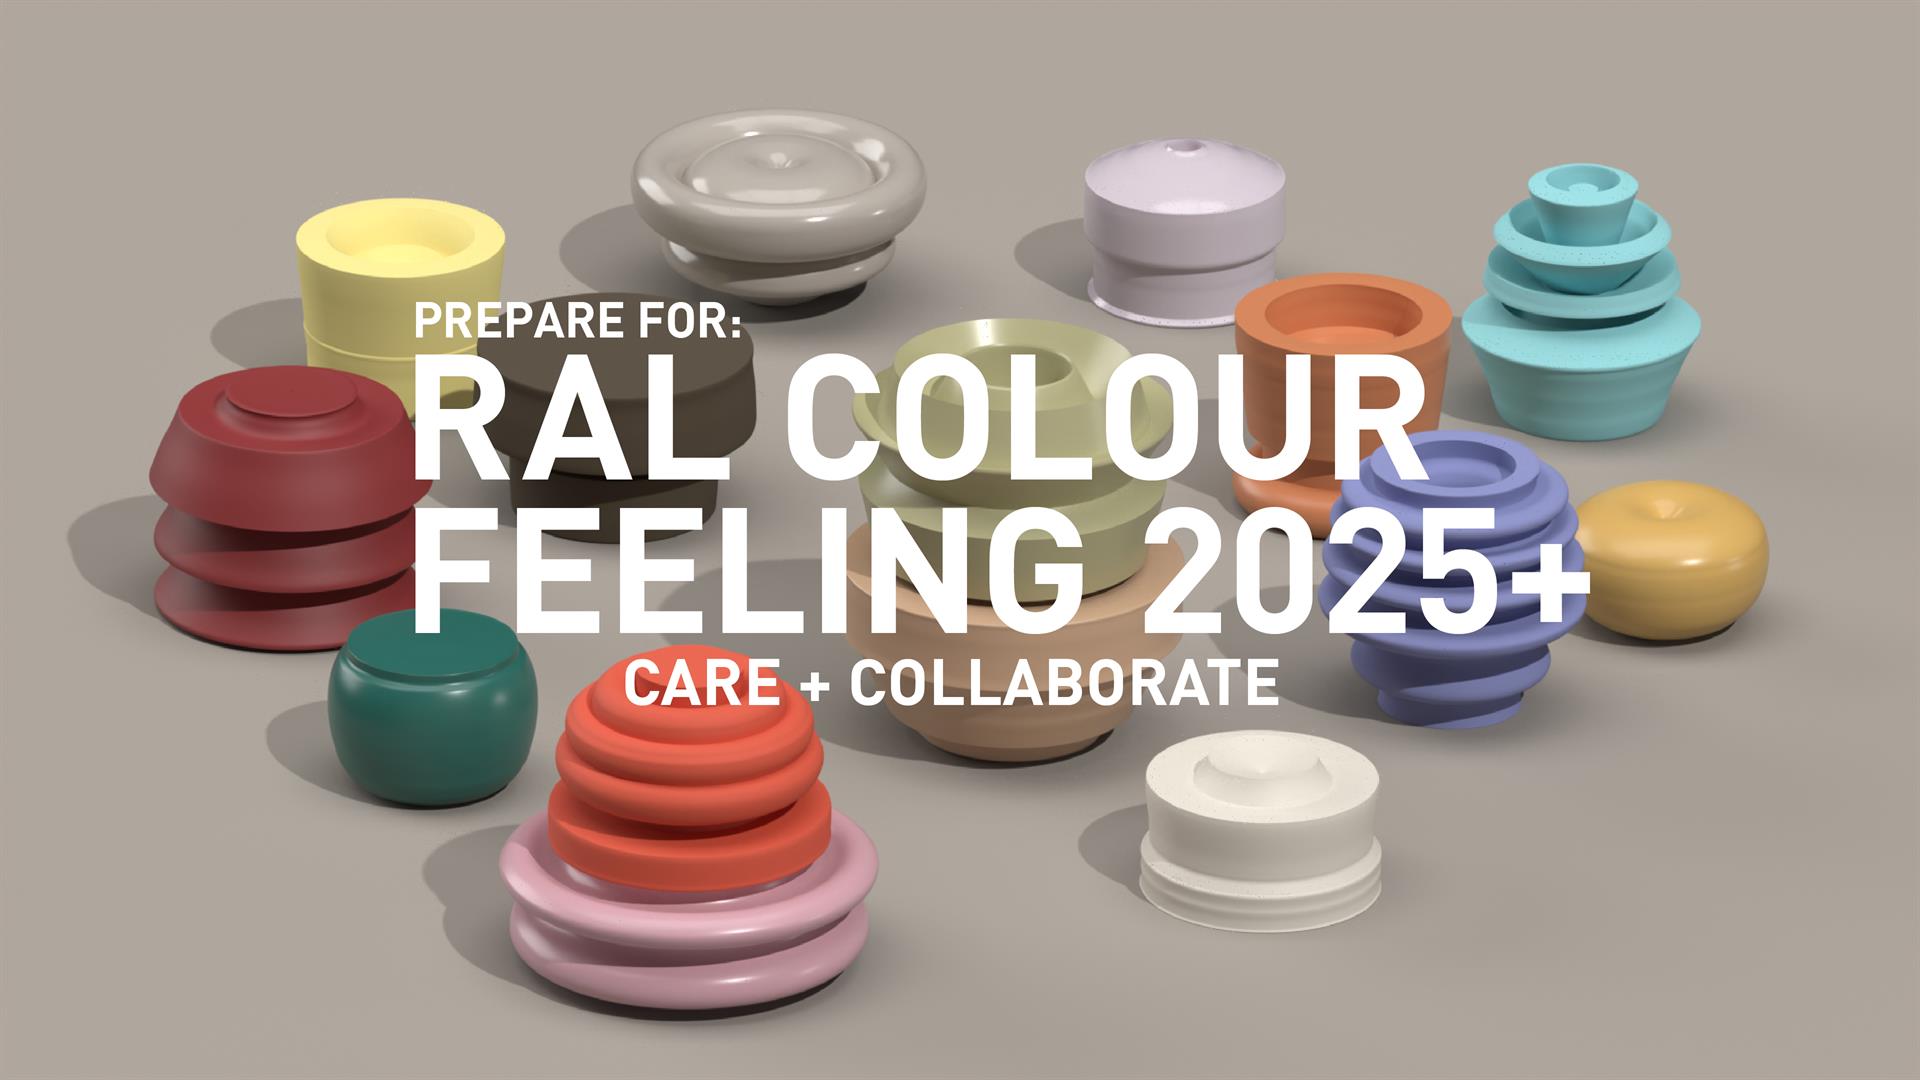 Save the Date RAL COLOUR FEELING 2025+